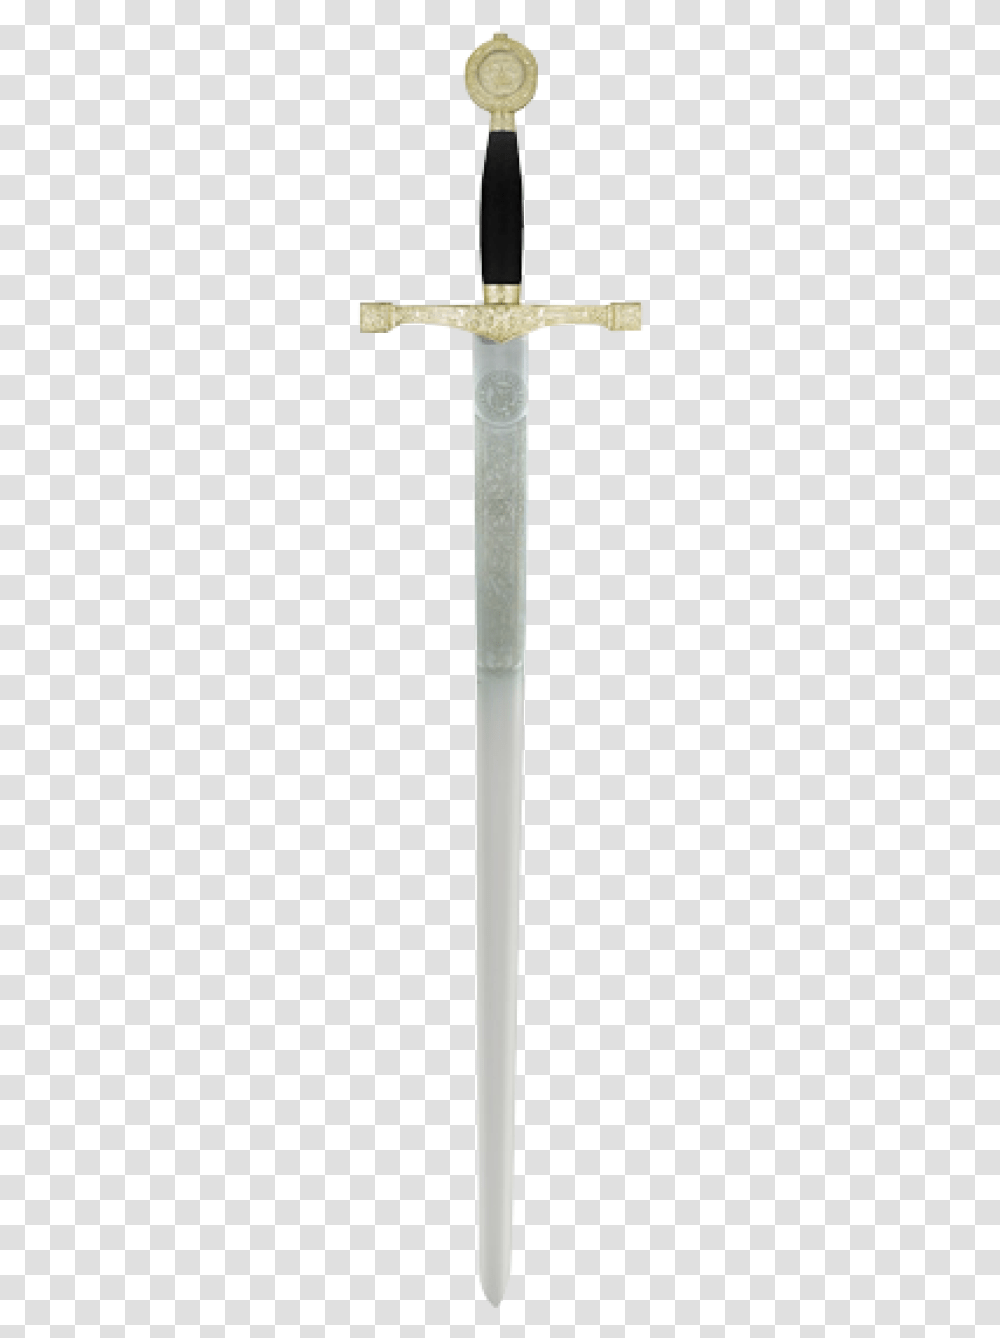 Sword Lord Of The Rings, Blade, Weapon, Crystal, Knife Transparent Png